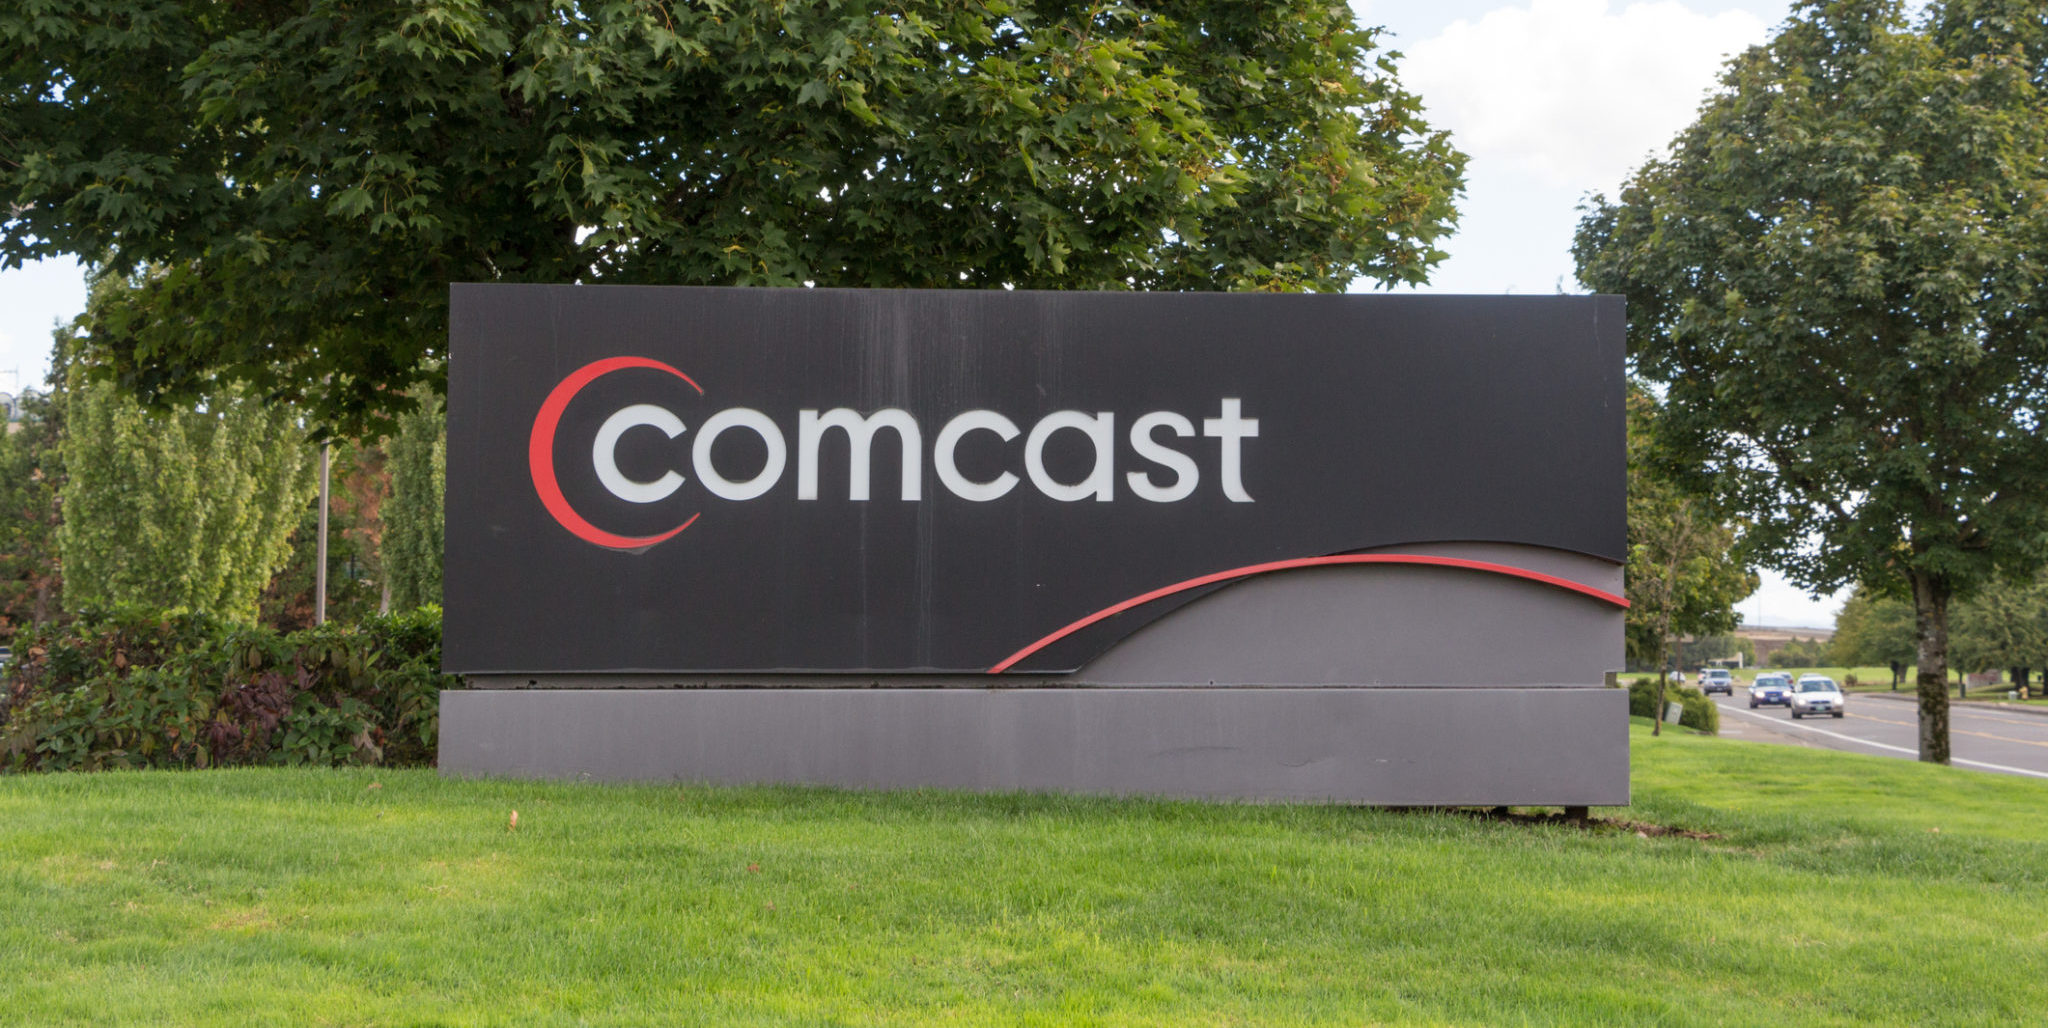 Comcast Brings Back The NFL Network & NFL RedZone to Its Xfinity TV